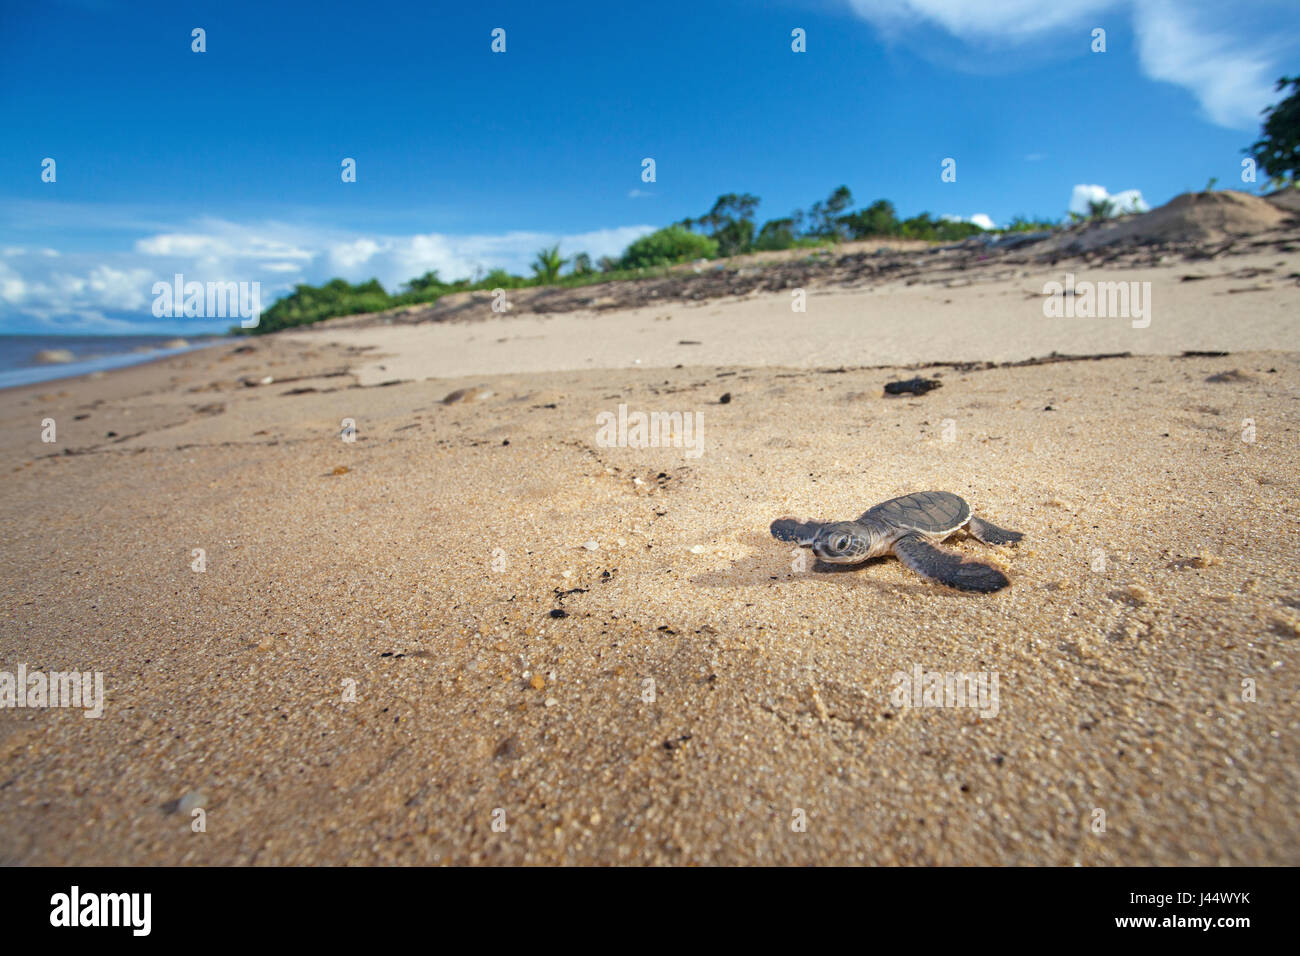 photo of a hatchling of a green turtle on its way to the sea Stock Photo